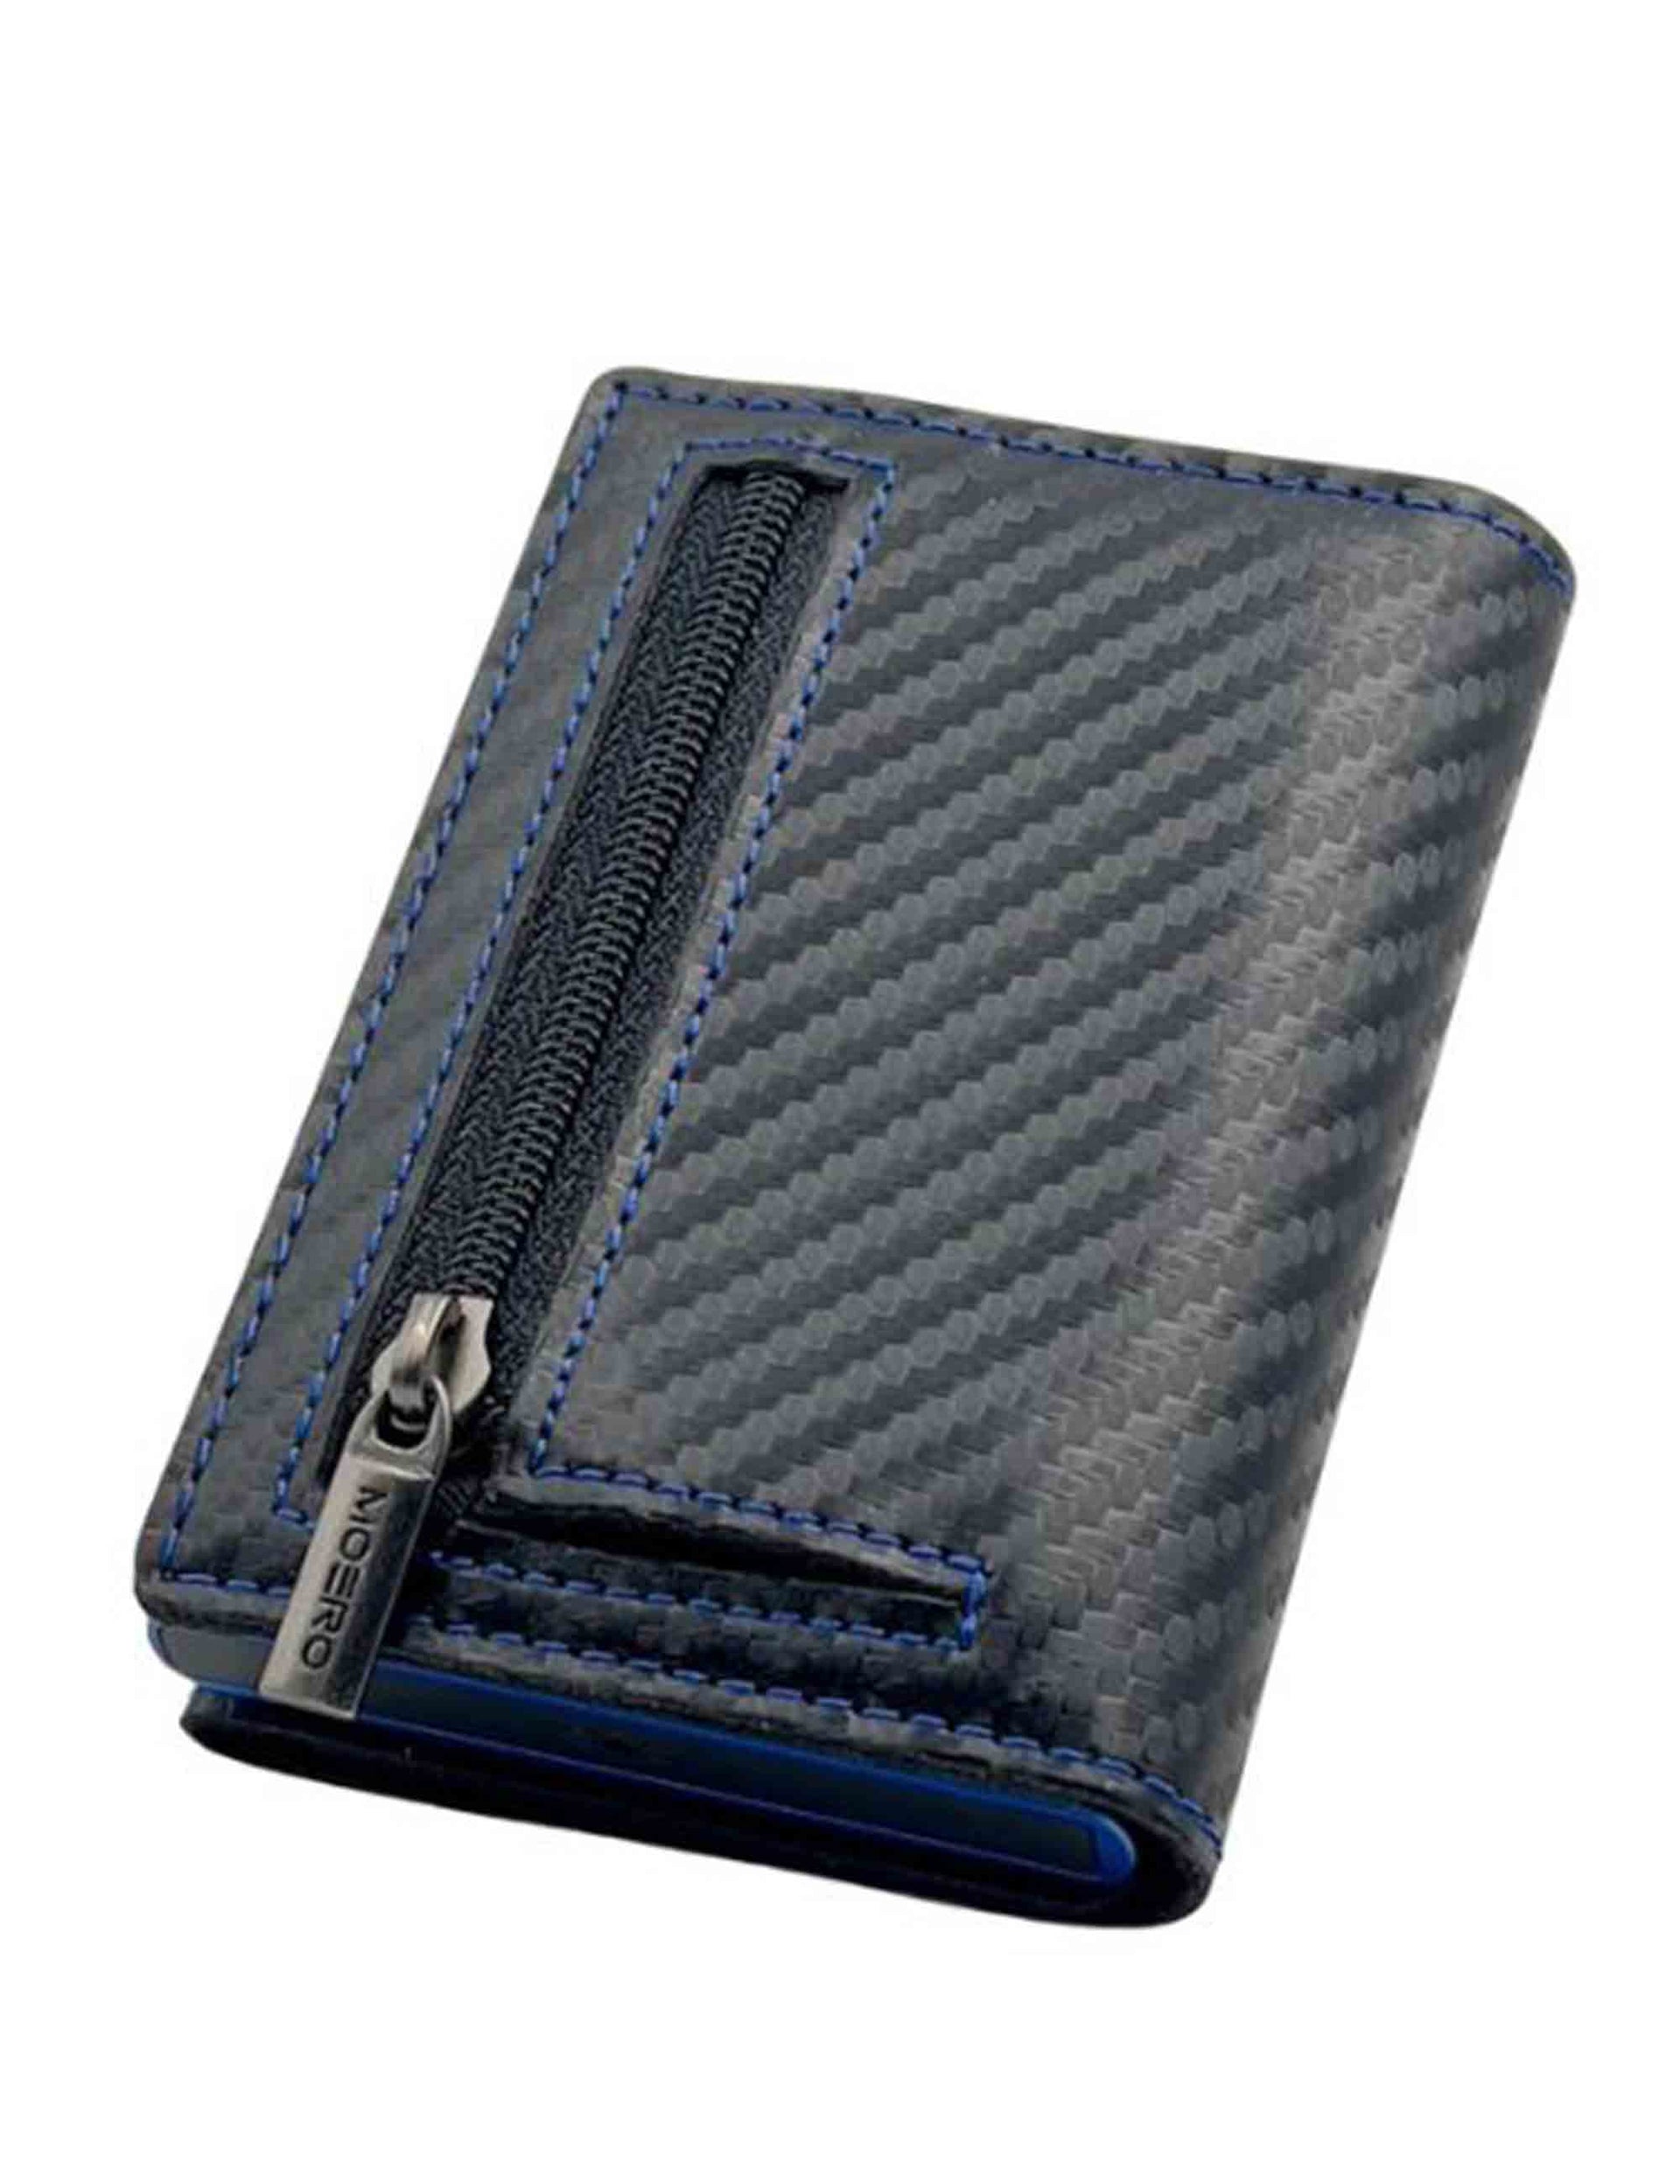 Pro card holder in black carbon effect leather with coin purse